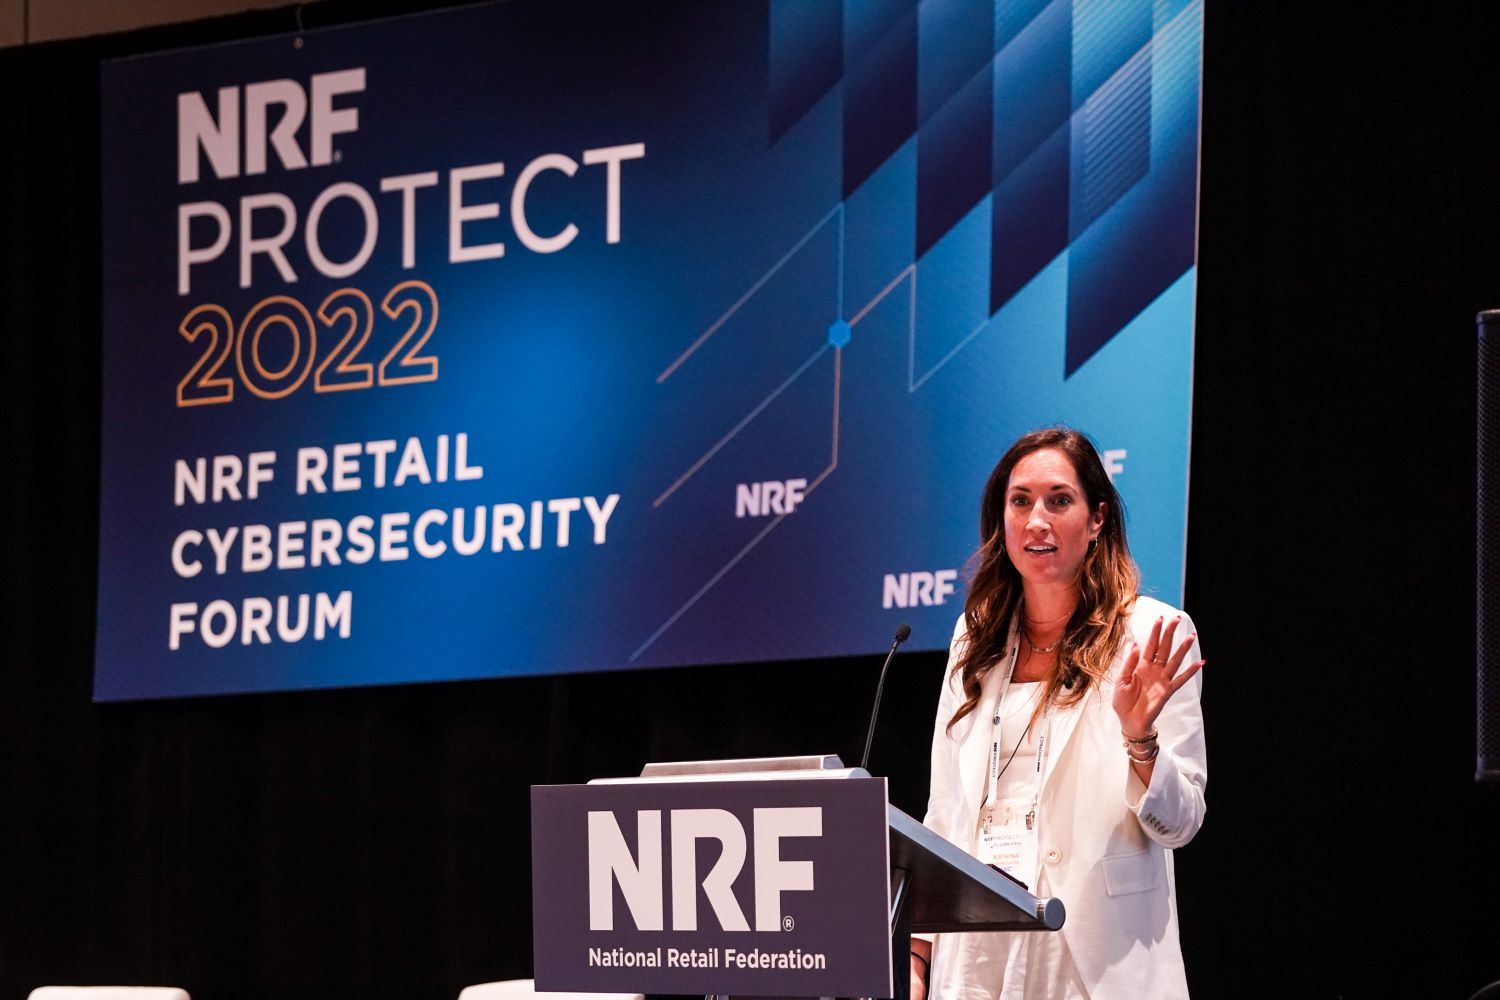 NRF PROTECT 2022